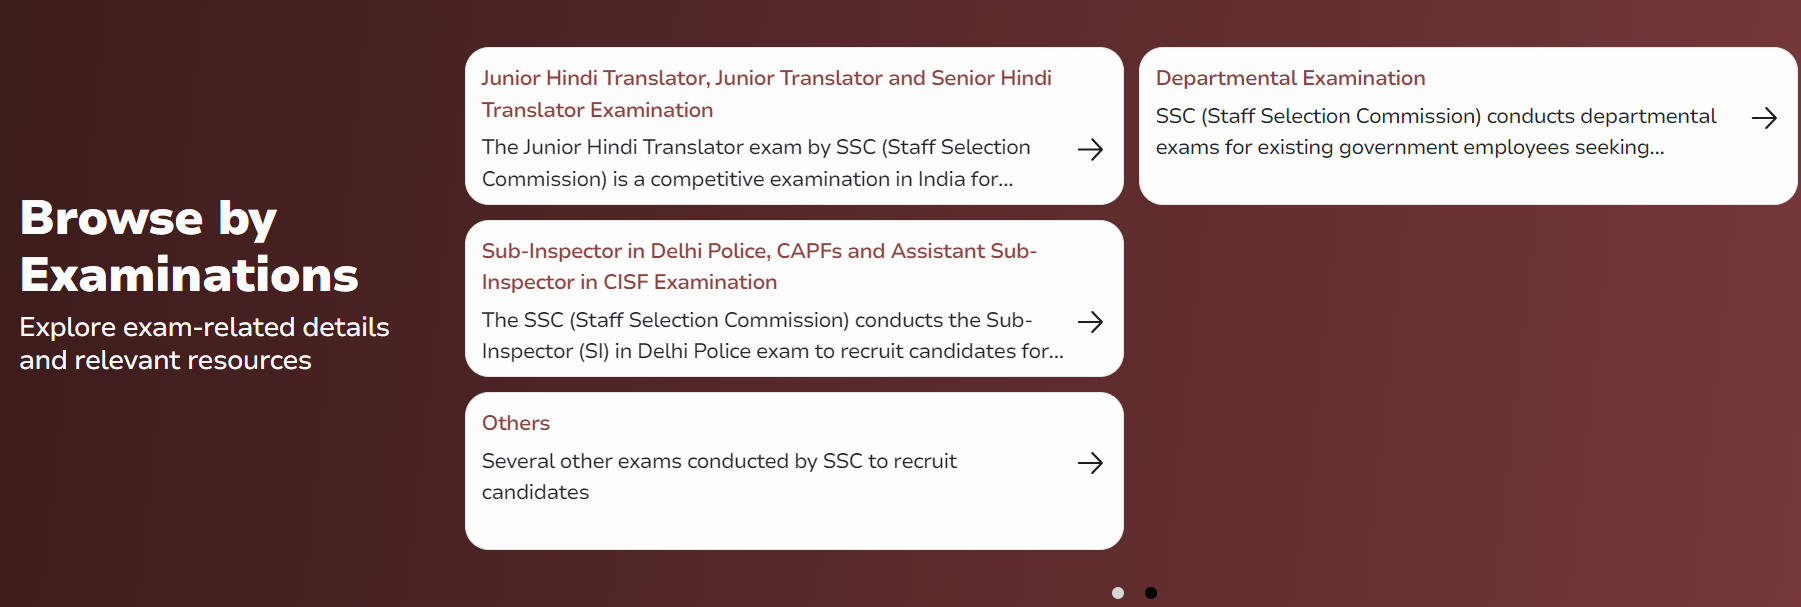 SSC New Official Website, Check ssc.gov.in_7.1